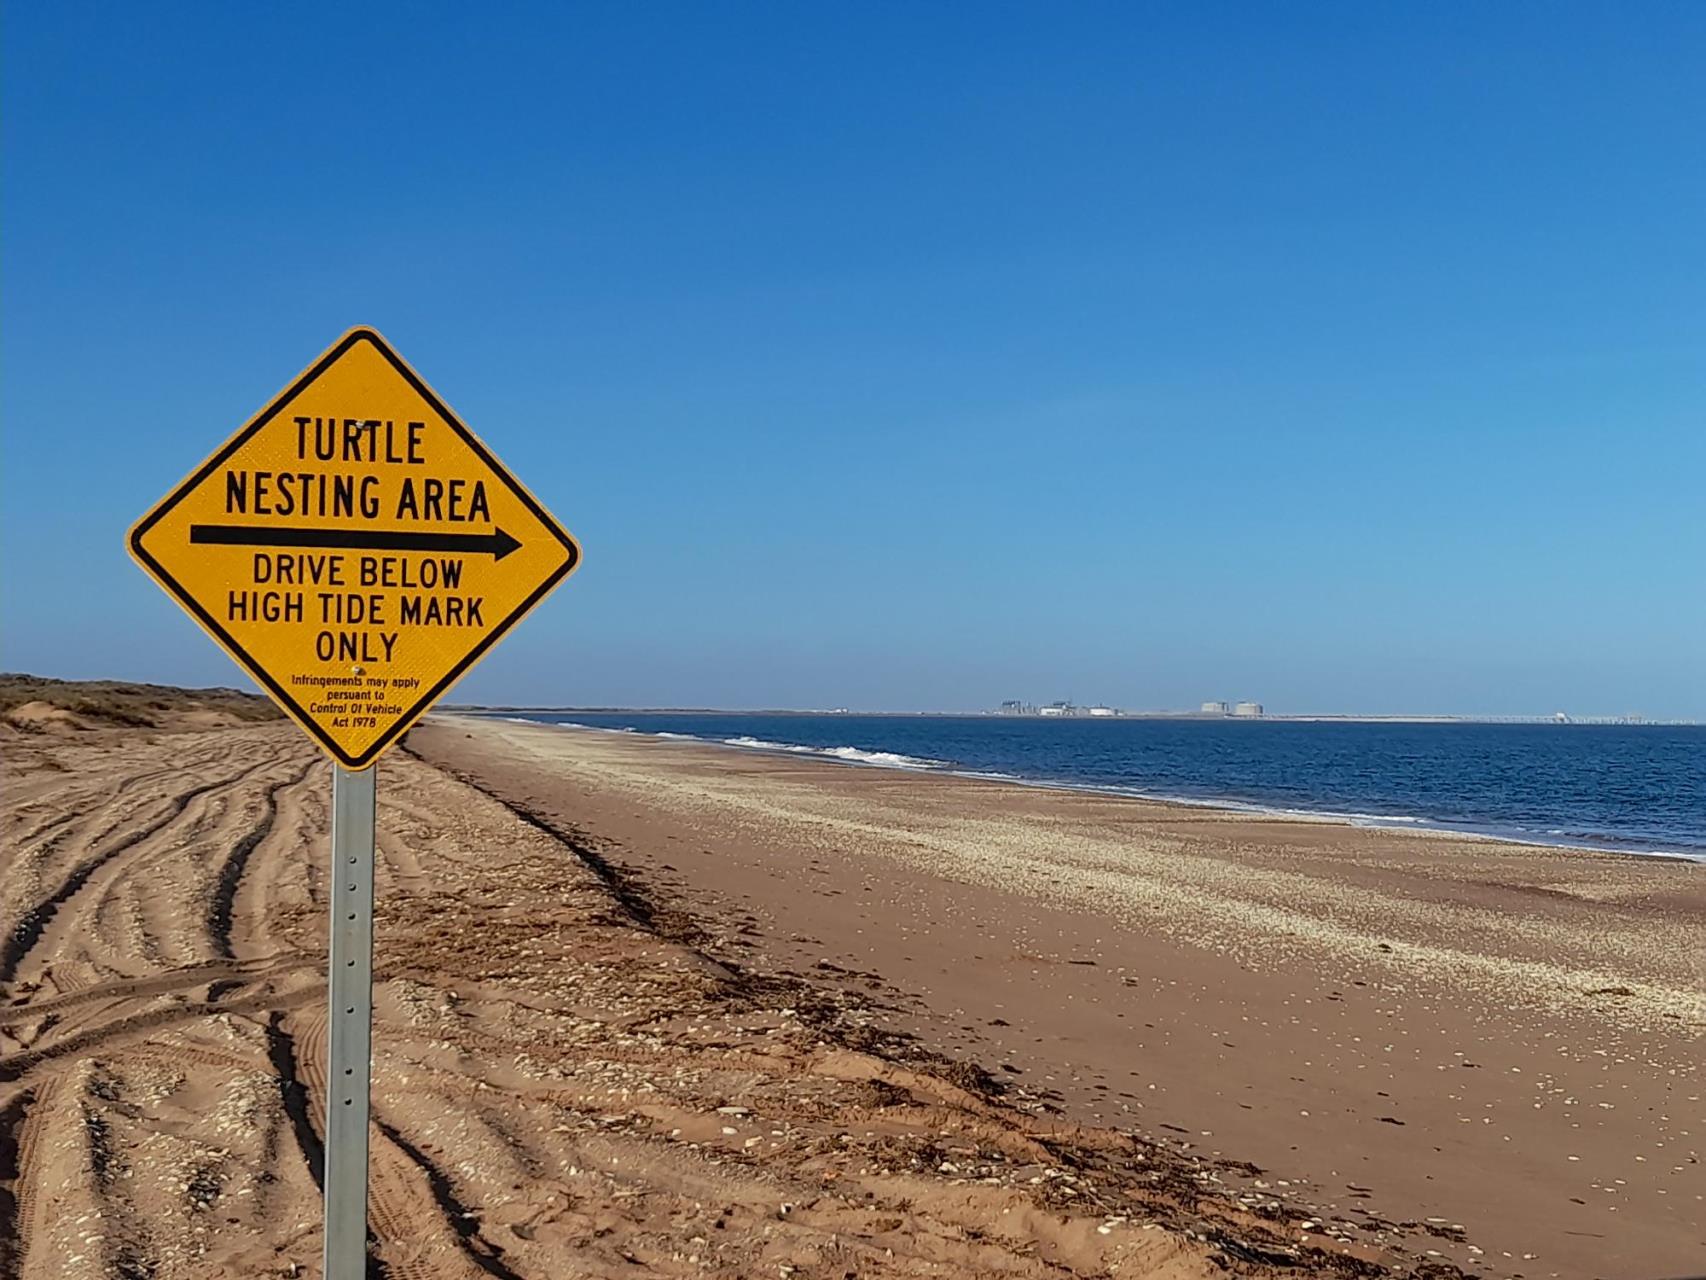 Residents and tourists asked to drive with caution during turtle nesting